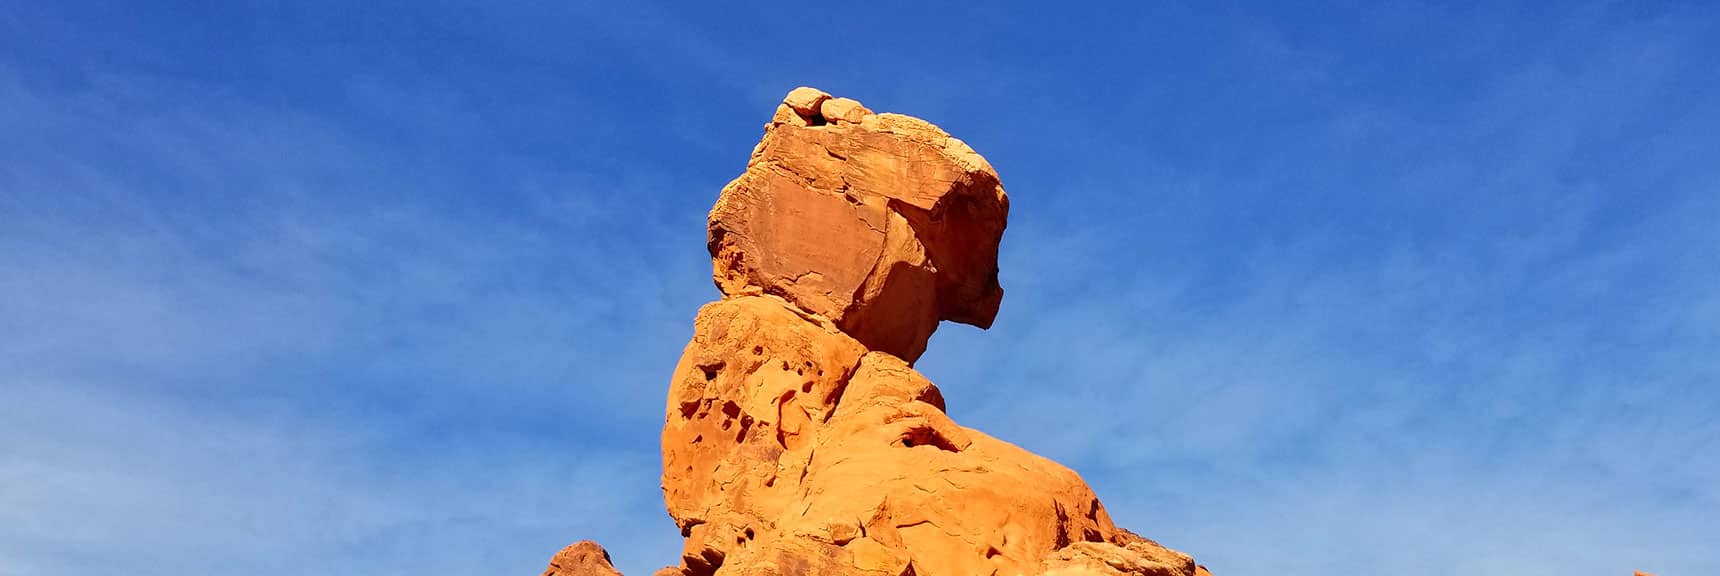 Approaching Balancing Rock in Valley of Fire State Park, Nevada